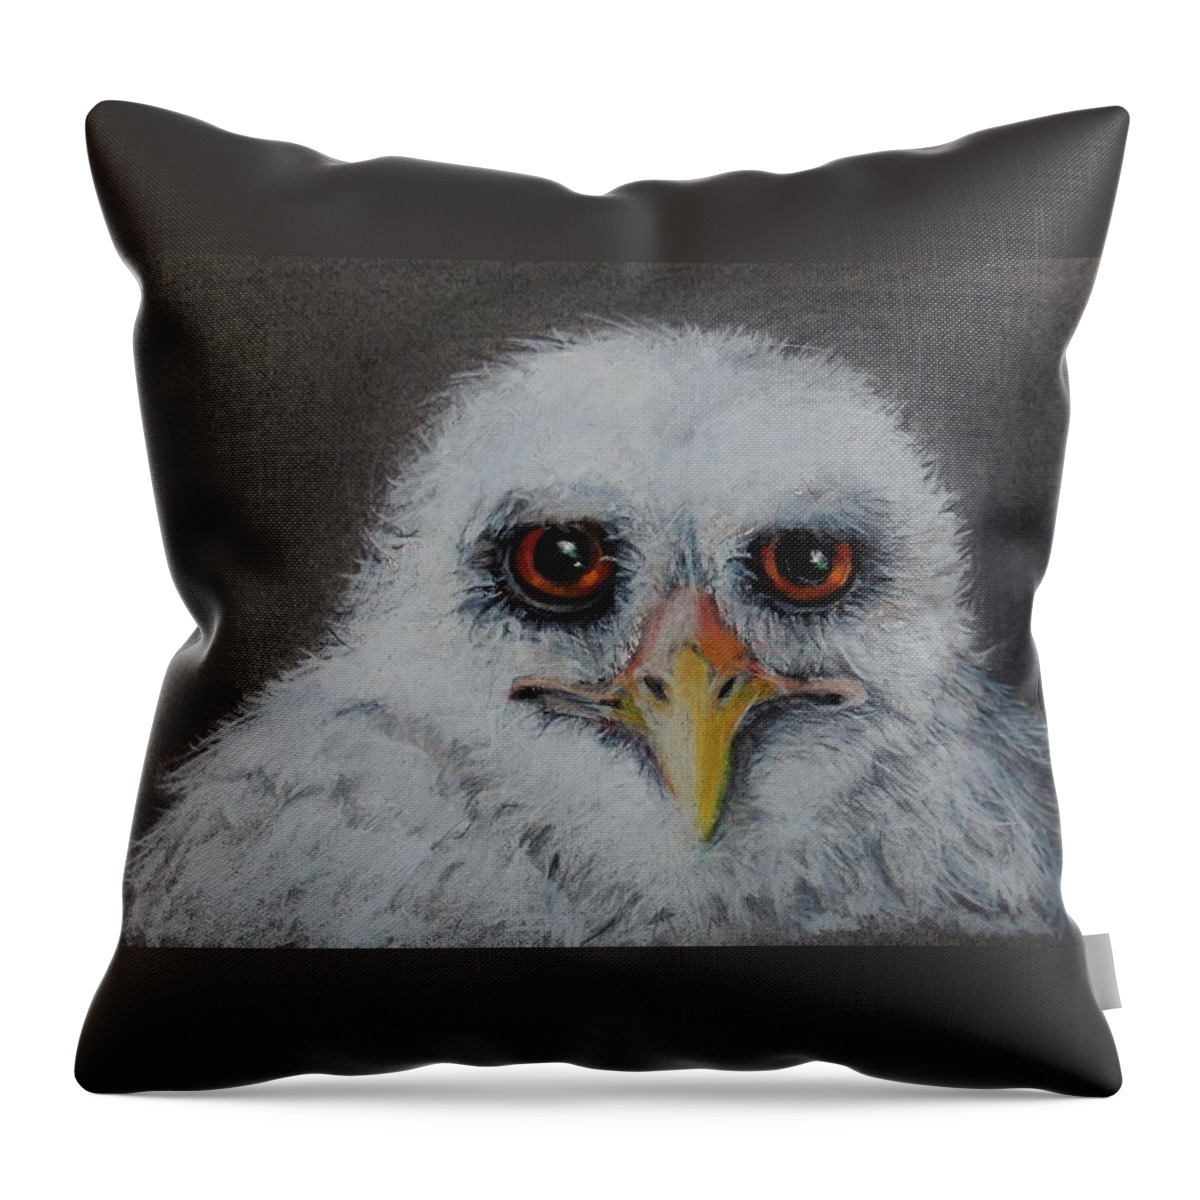 Owl Throw Pillow featuring the drawing Who? by Jean Cormier